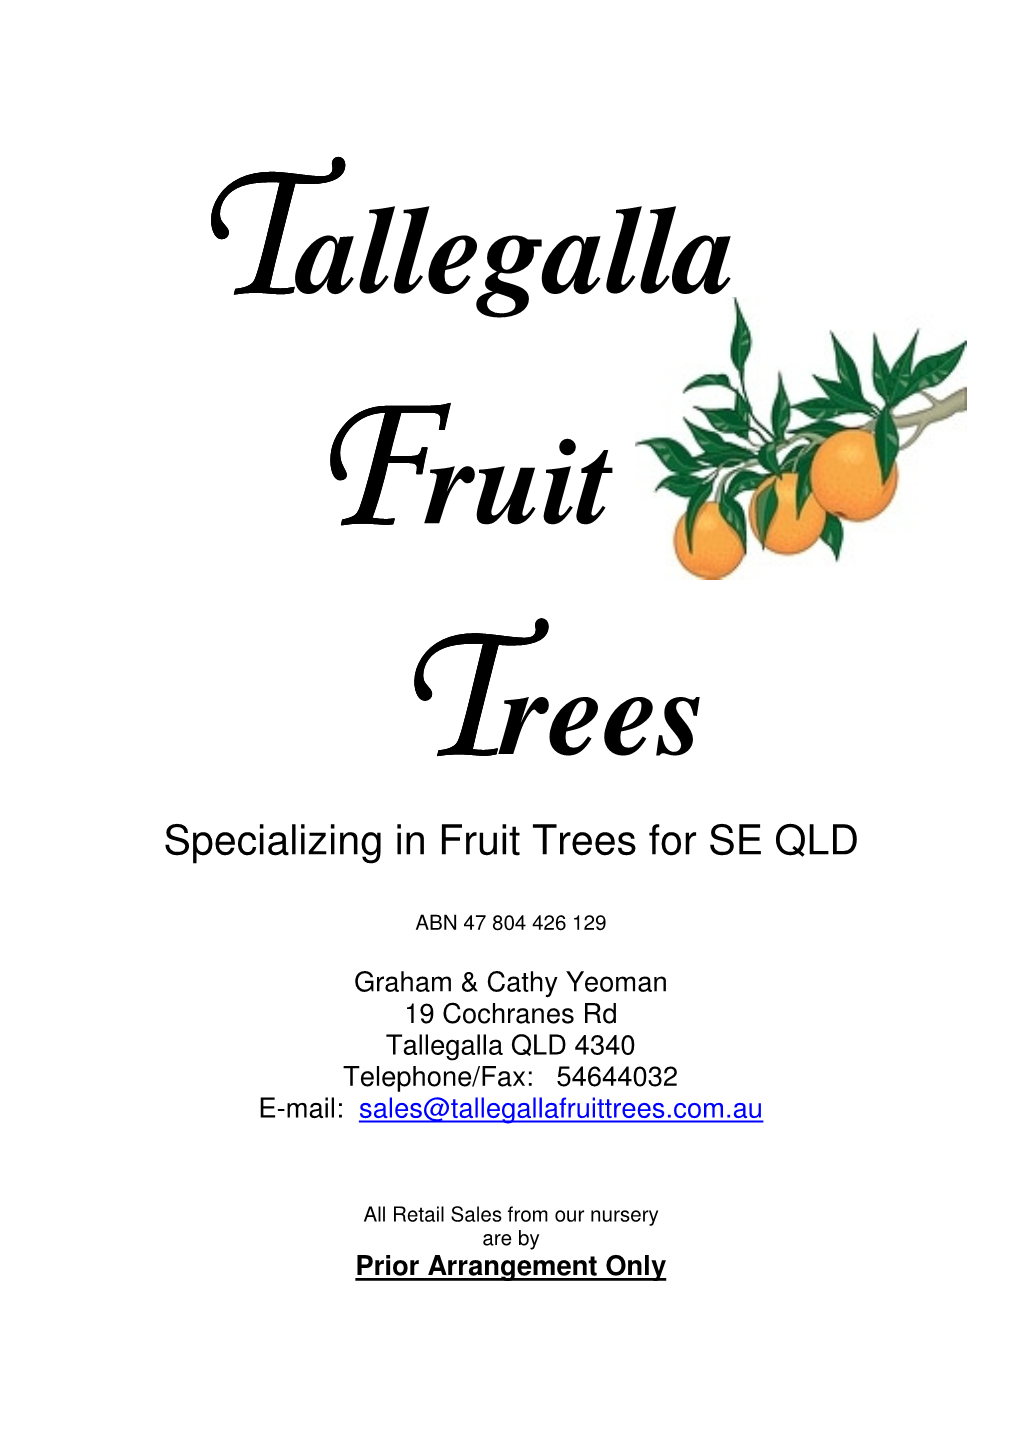 Specializing in Fruit Trees for SE QLD